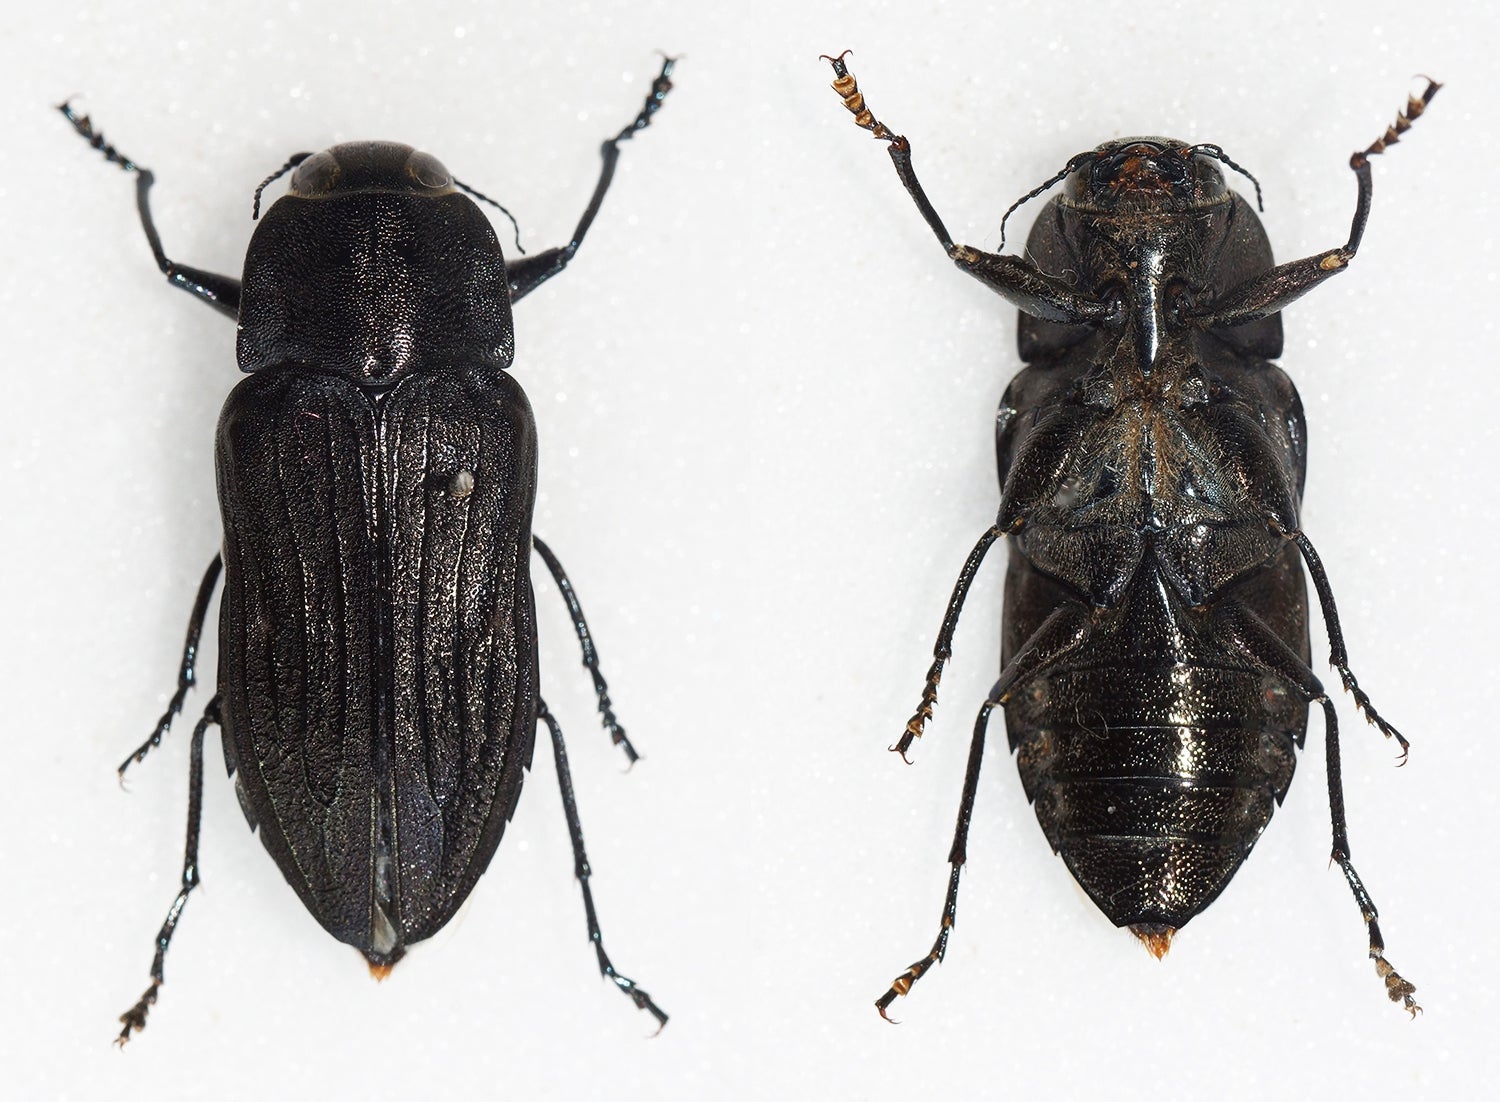 Australian fire beetles are known to head towards fire-damaged areas to mate